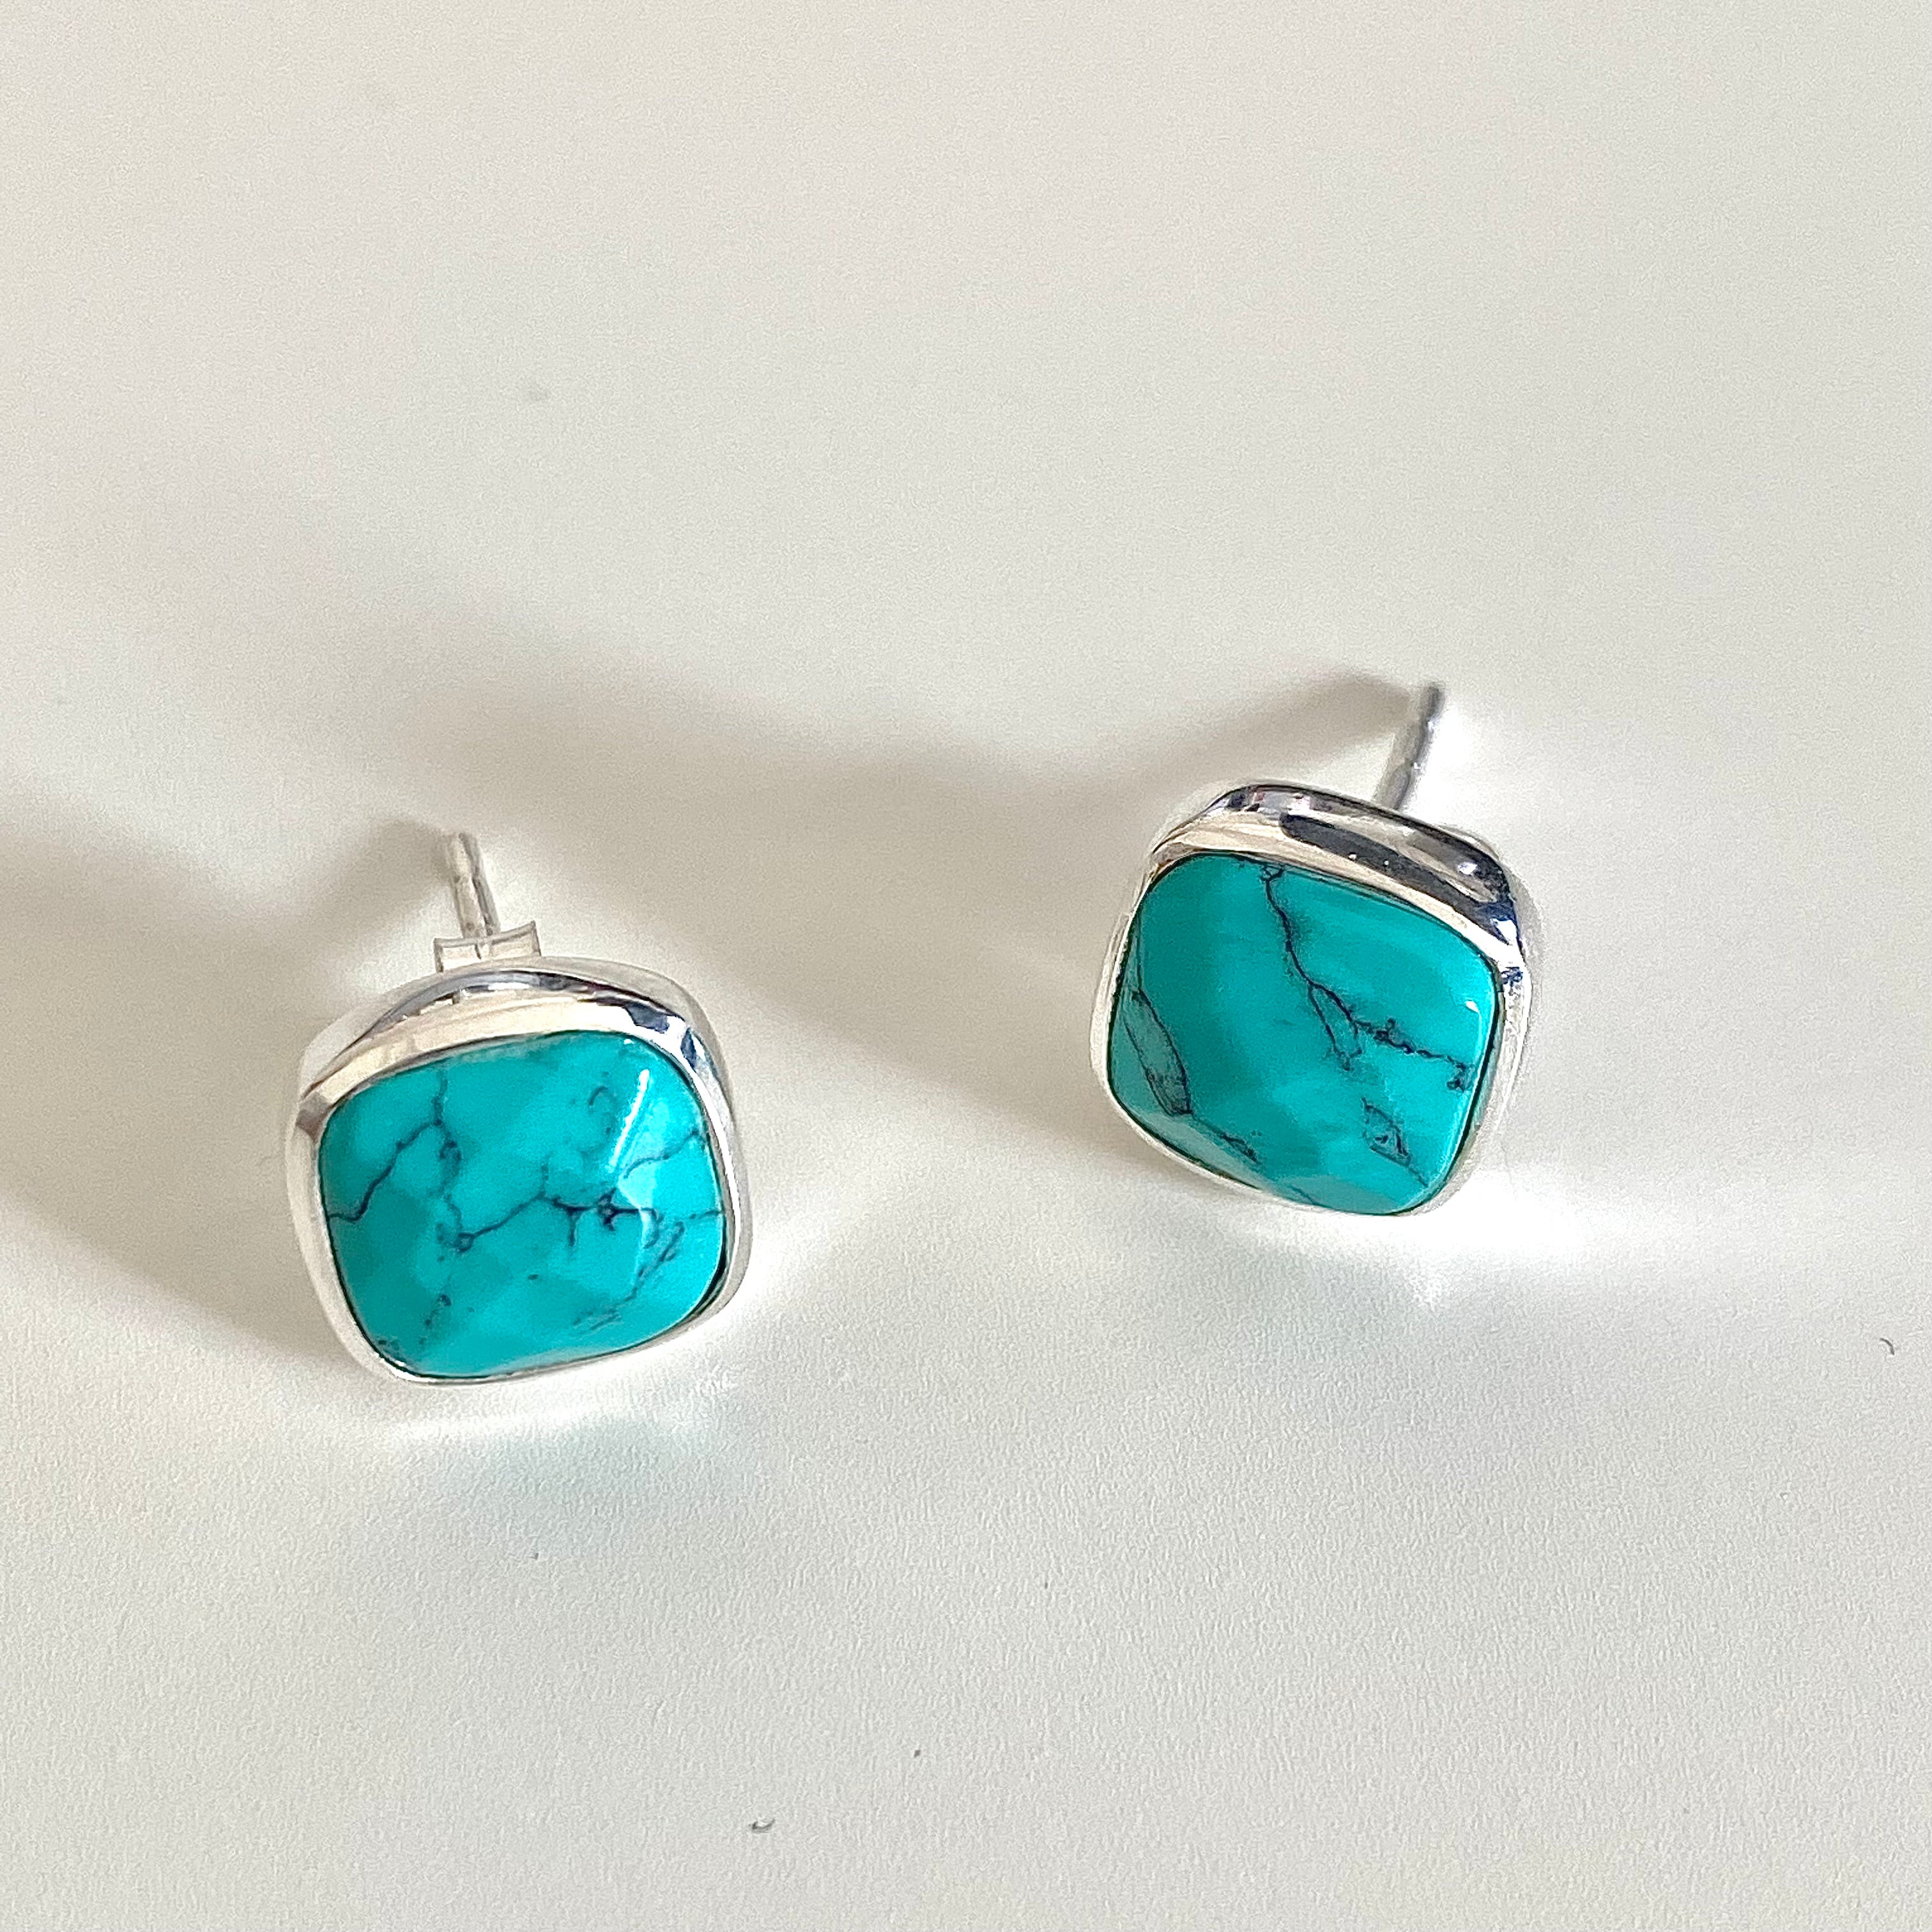 Faceted Square Turquoise Gemstone Stud Earrings in Sterling Silver